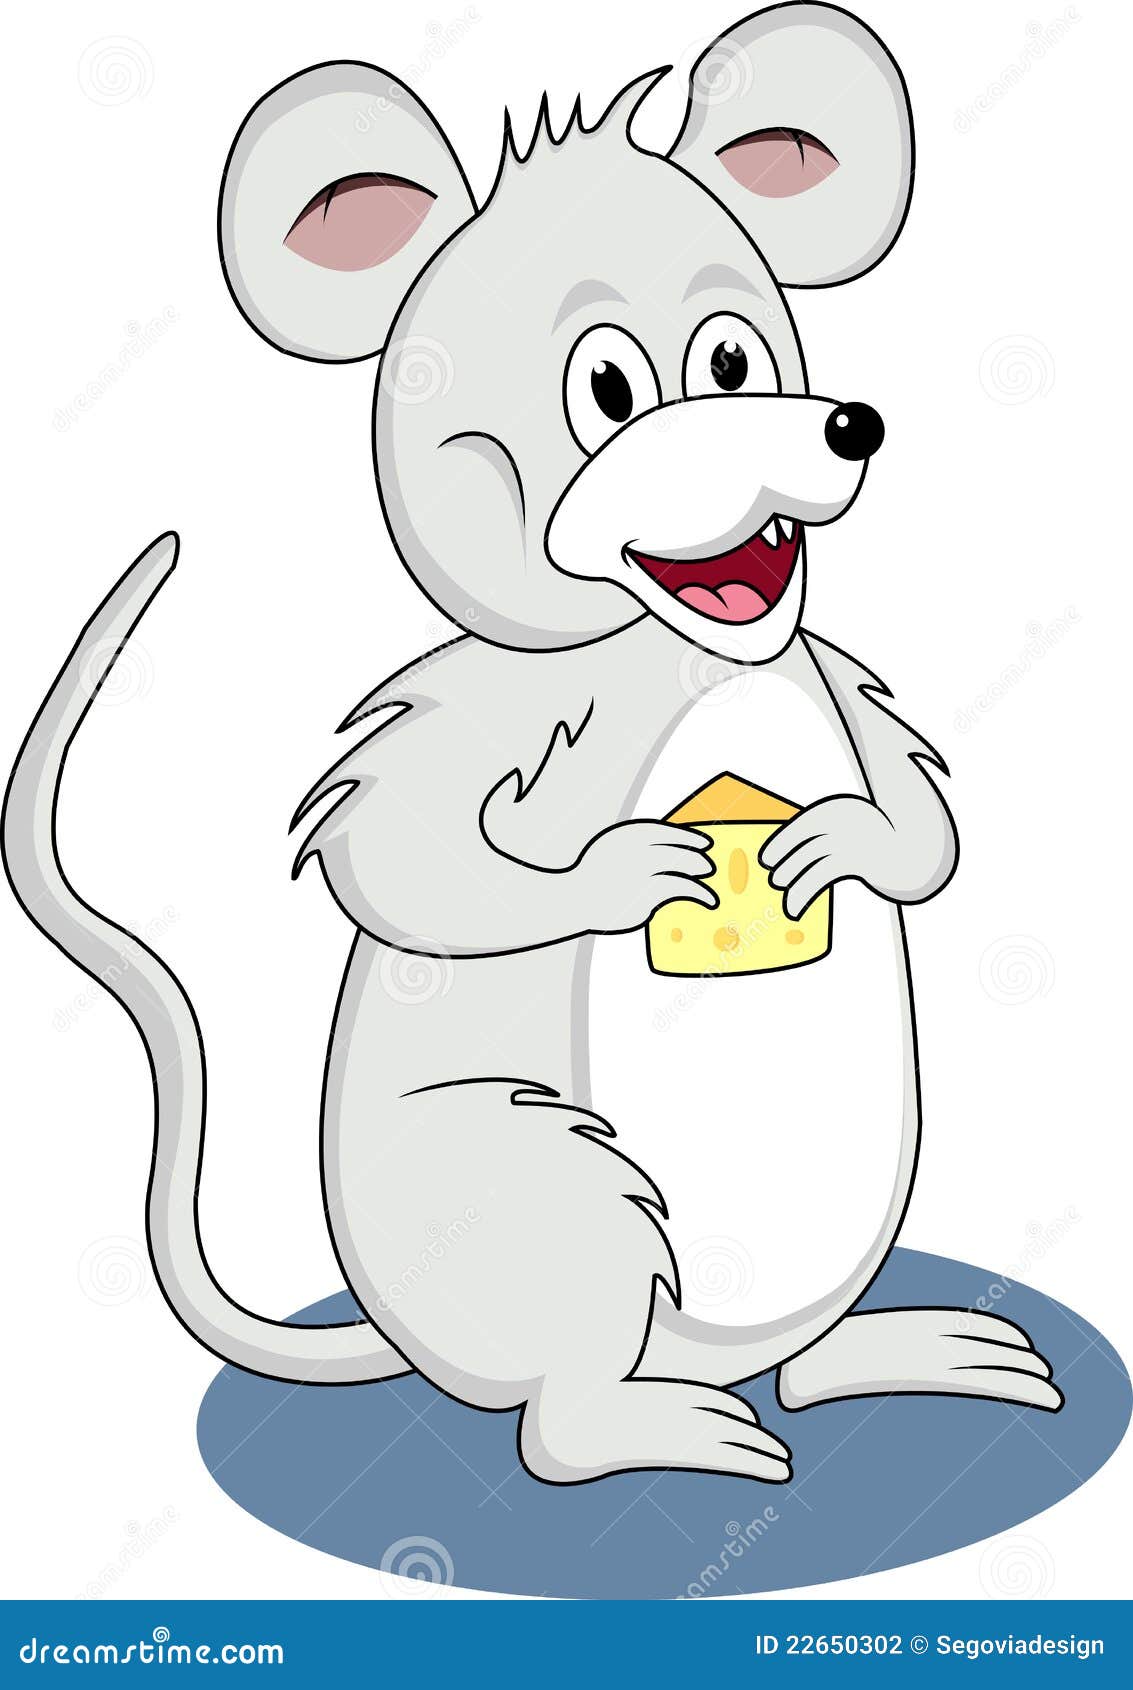 Funny Mouse Cartoons